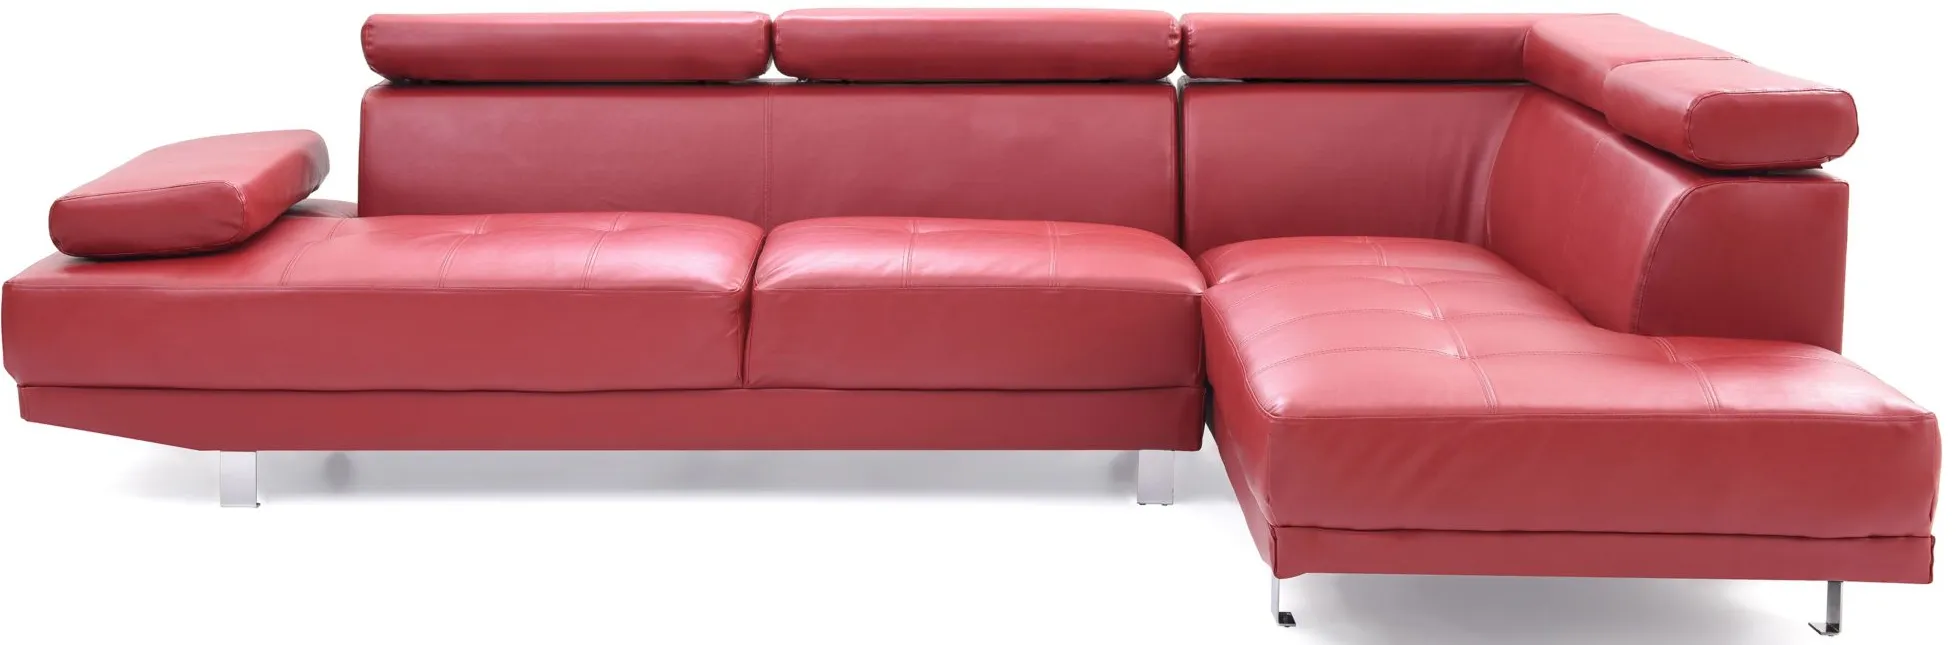 Riveredge 2-pc. Sectional Sofa in Red by Glory Furniture